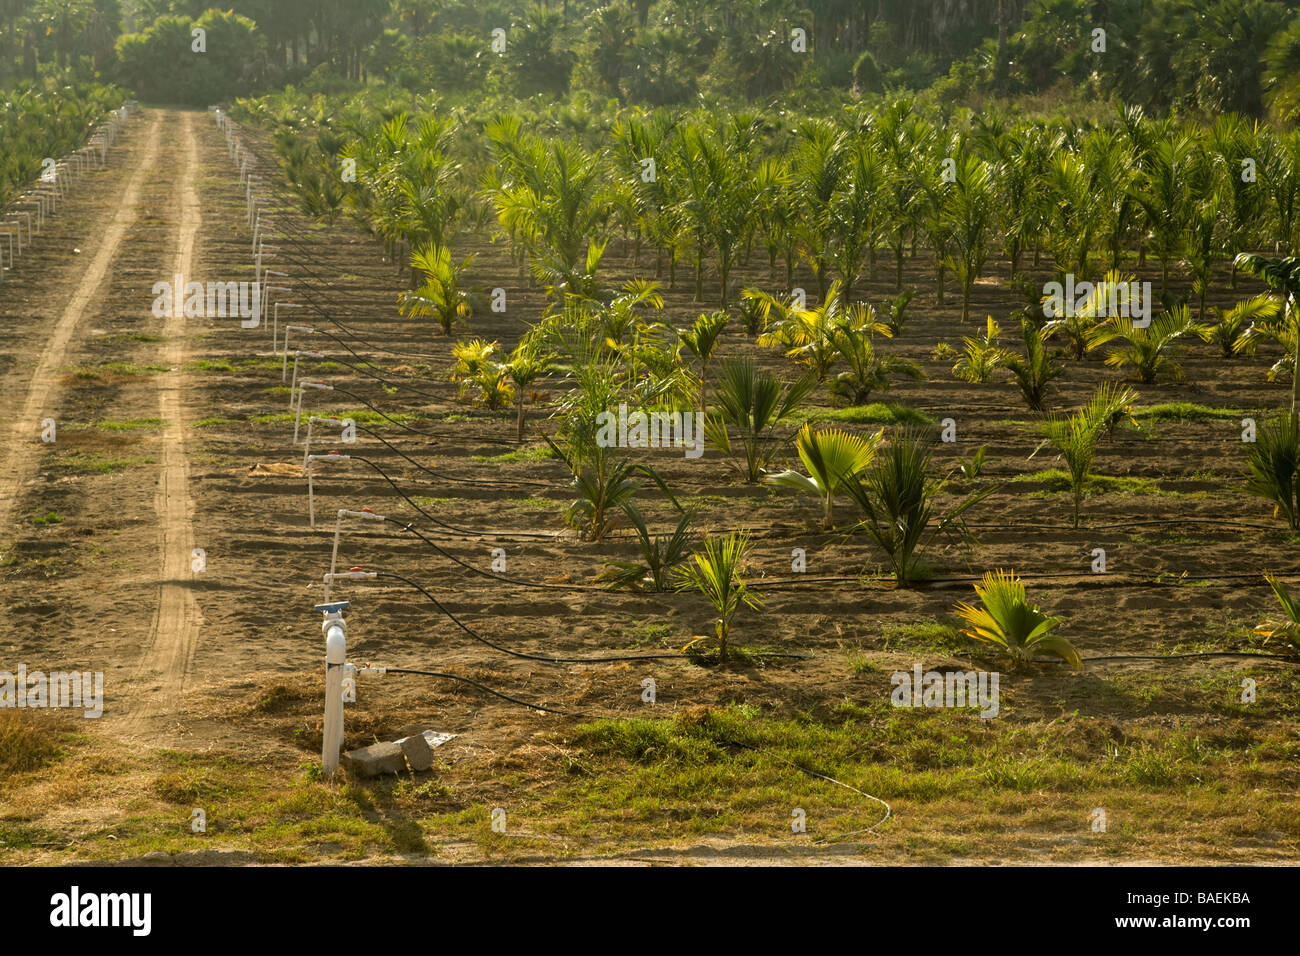 MEXICO Todos Santos Rows of irrigated palm trees growing in plant nursery field Sierra Laguna mountains in distance Stock Photo